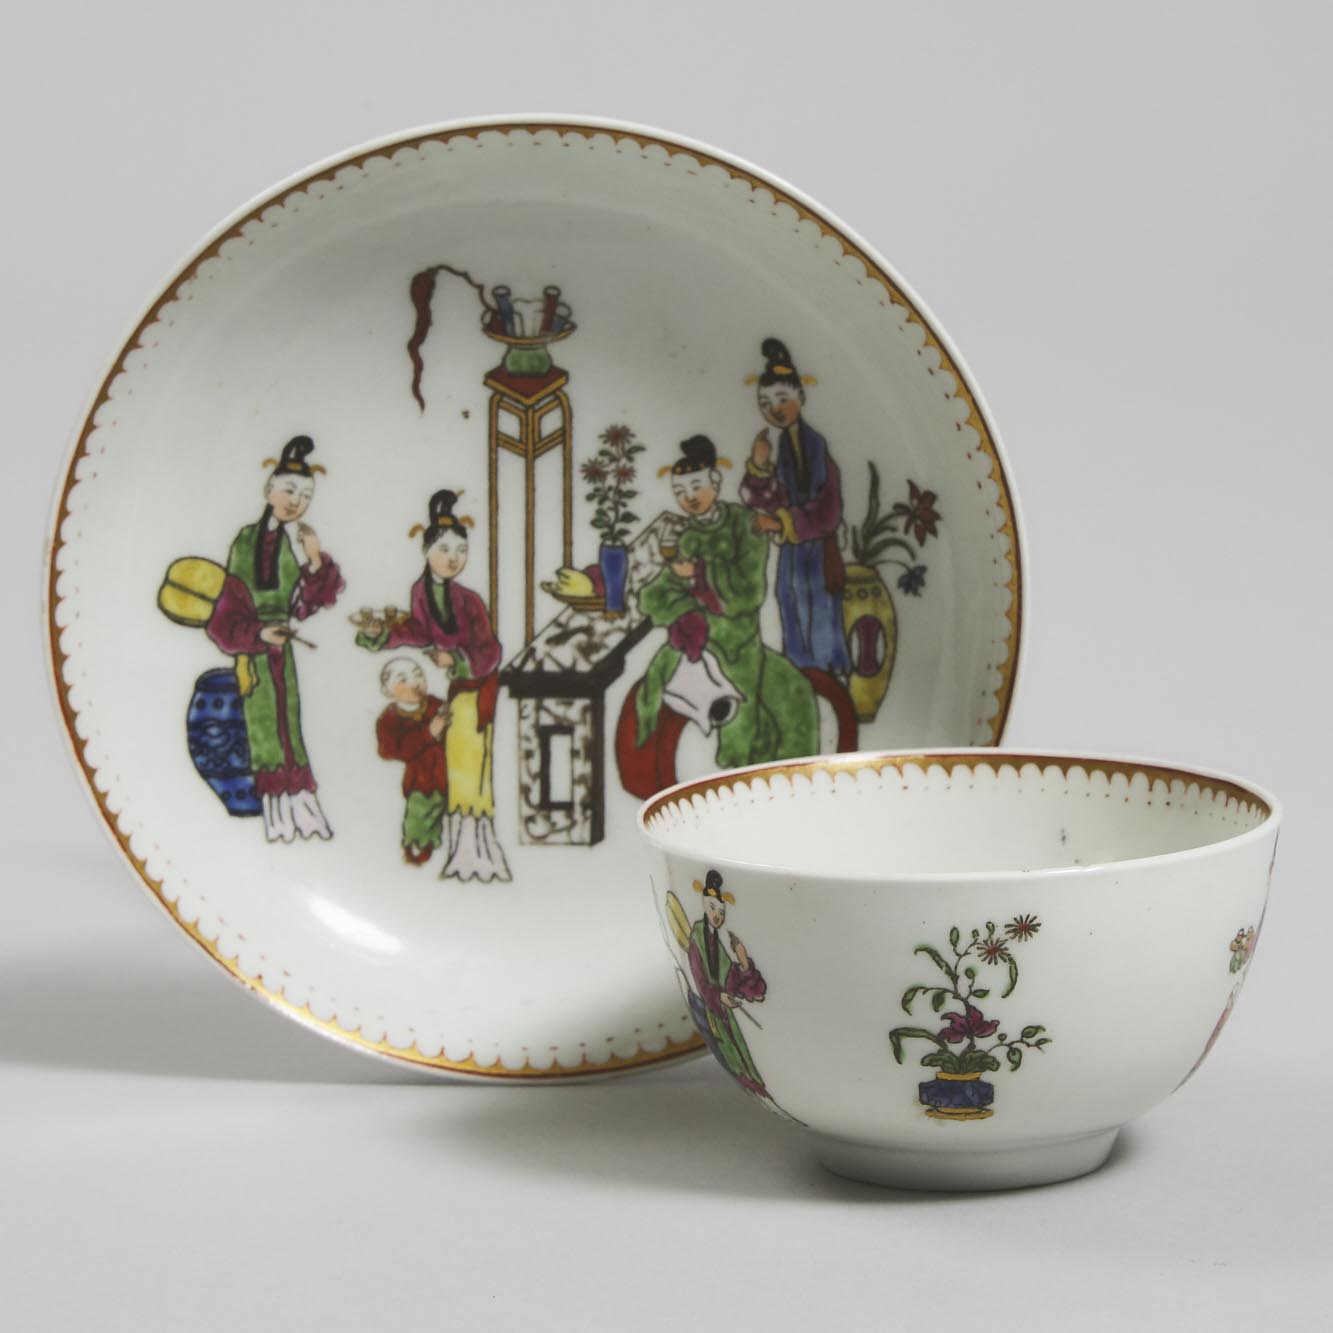 Worcester 'Chinese Family' Tea Bowl and Saucer, c.1770-75